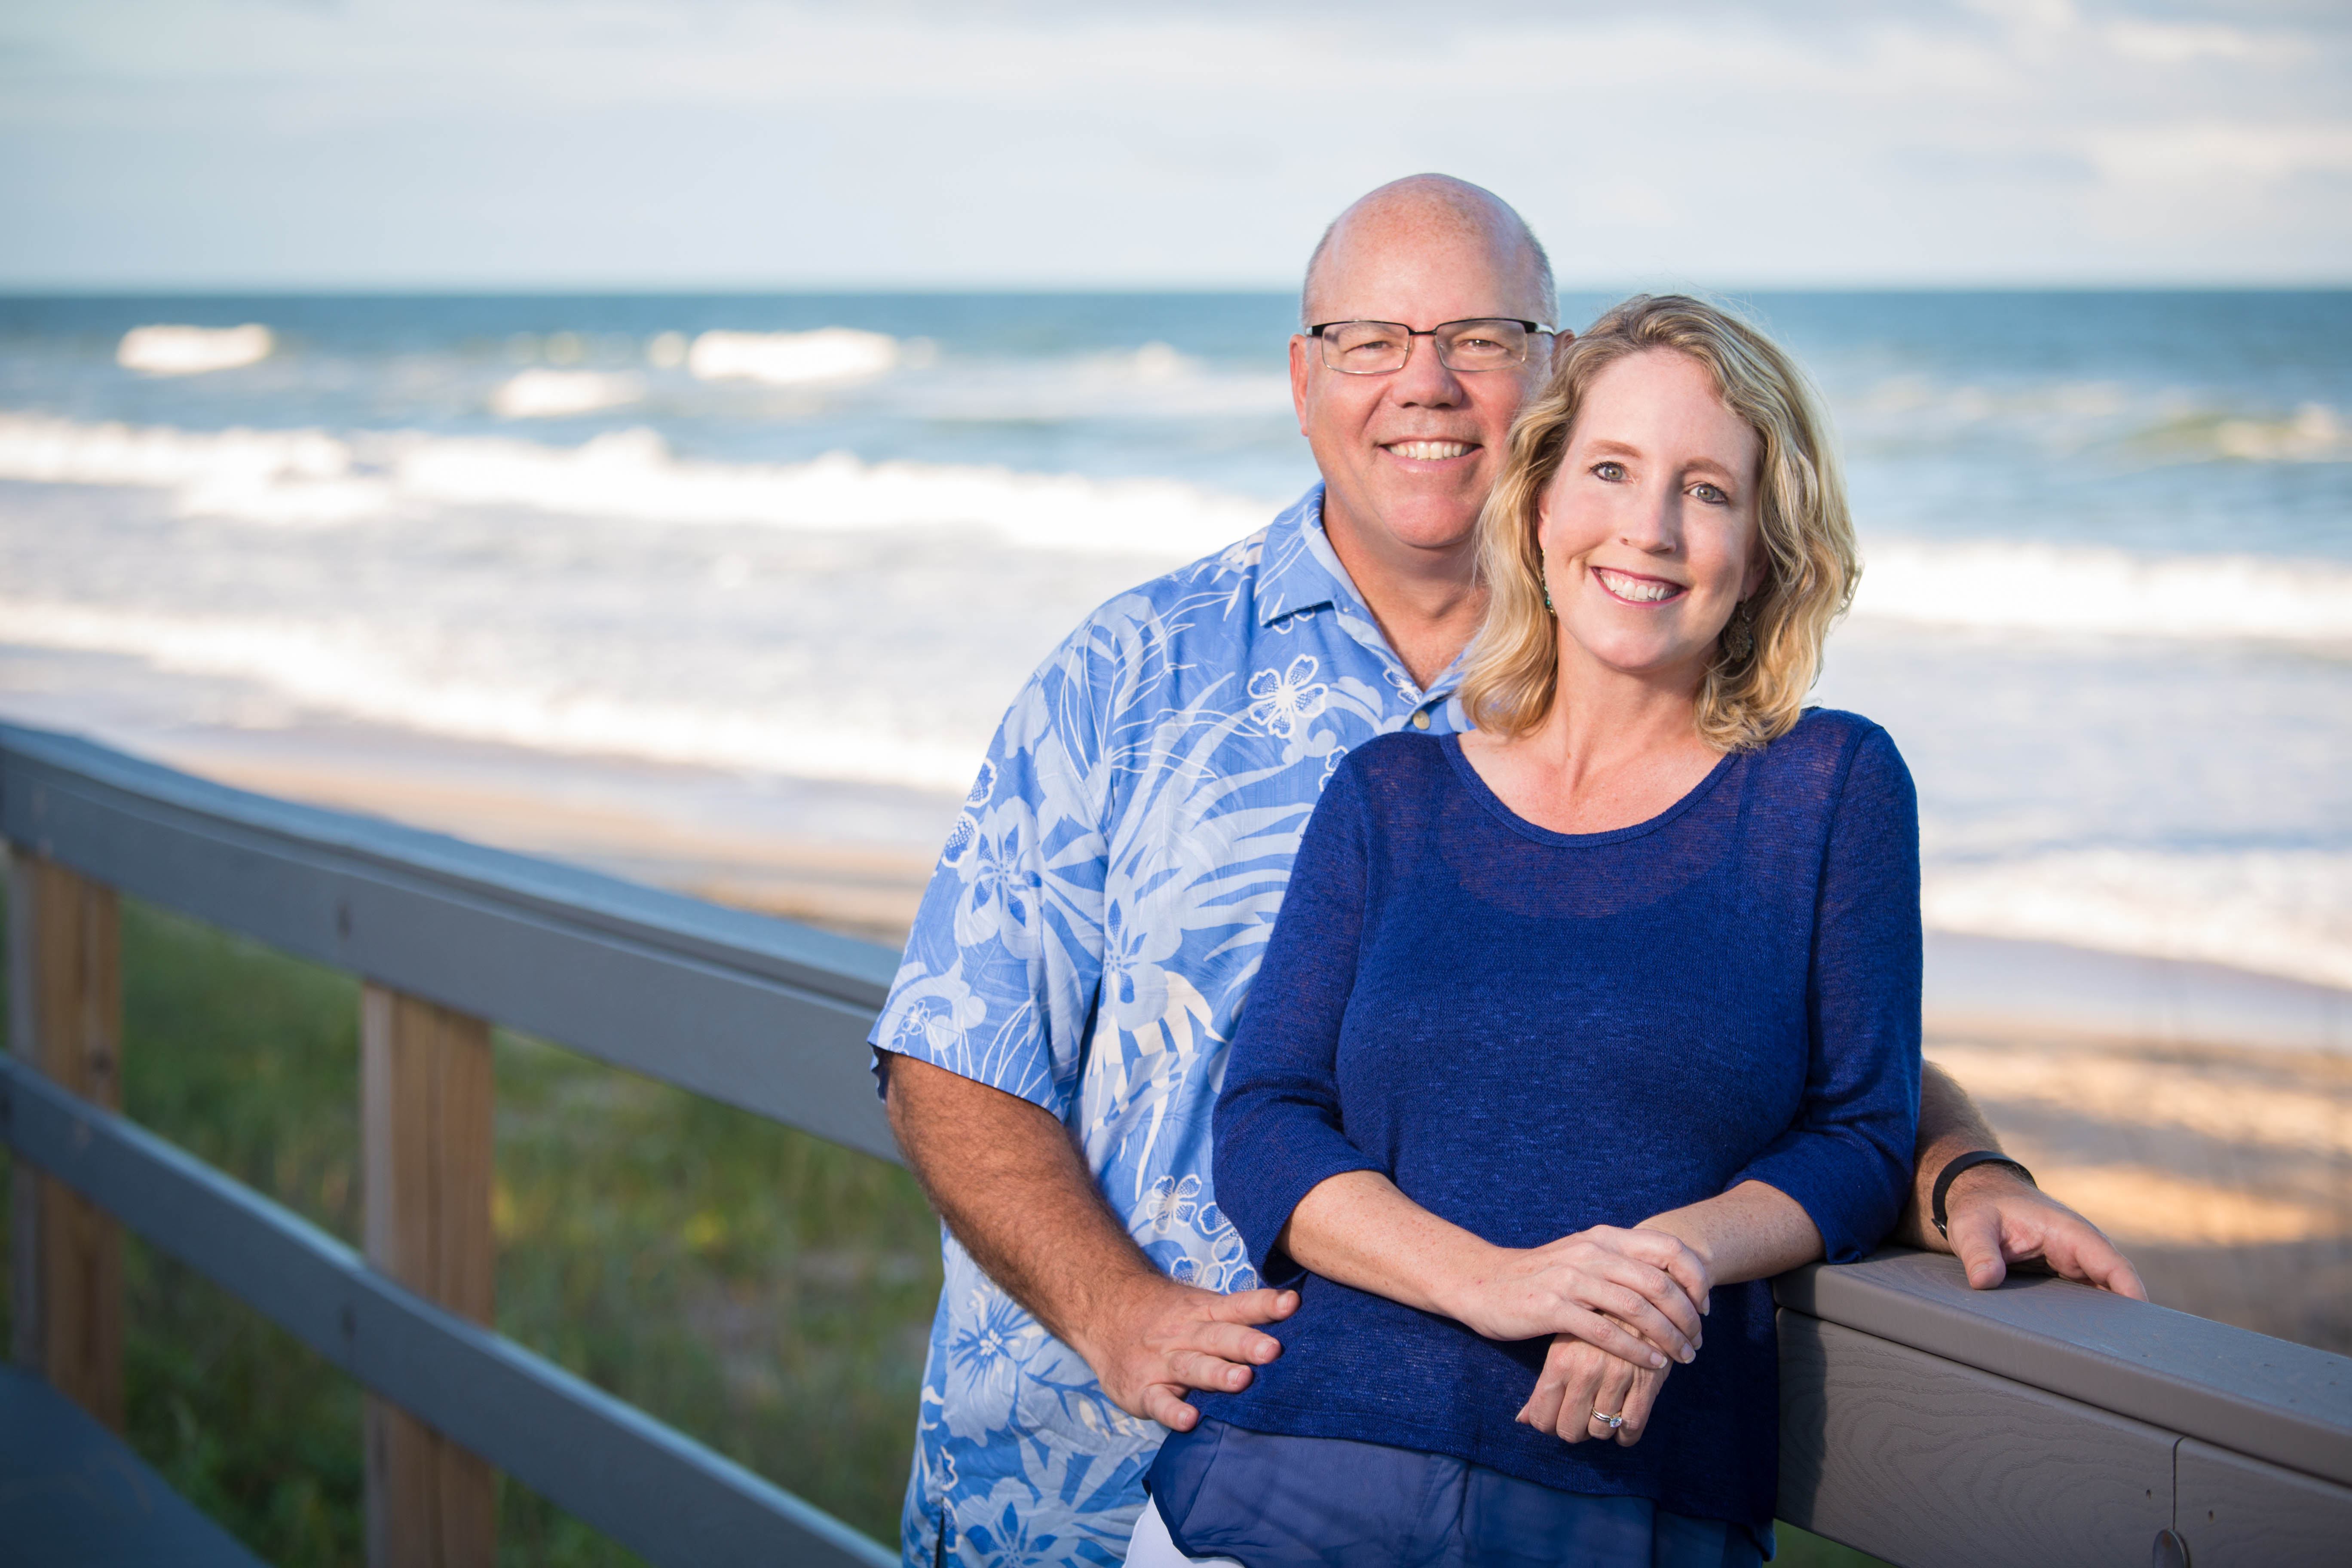 Tim and Sara Hale, co-founders and managing partners, started Coastal Cloud in 2012 with the goal of creating a modern consulting firm focused on client outcomes that was led by expert consultants who would enjoy a work/life balance that was lacking in the industry.